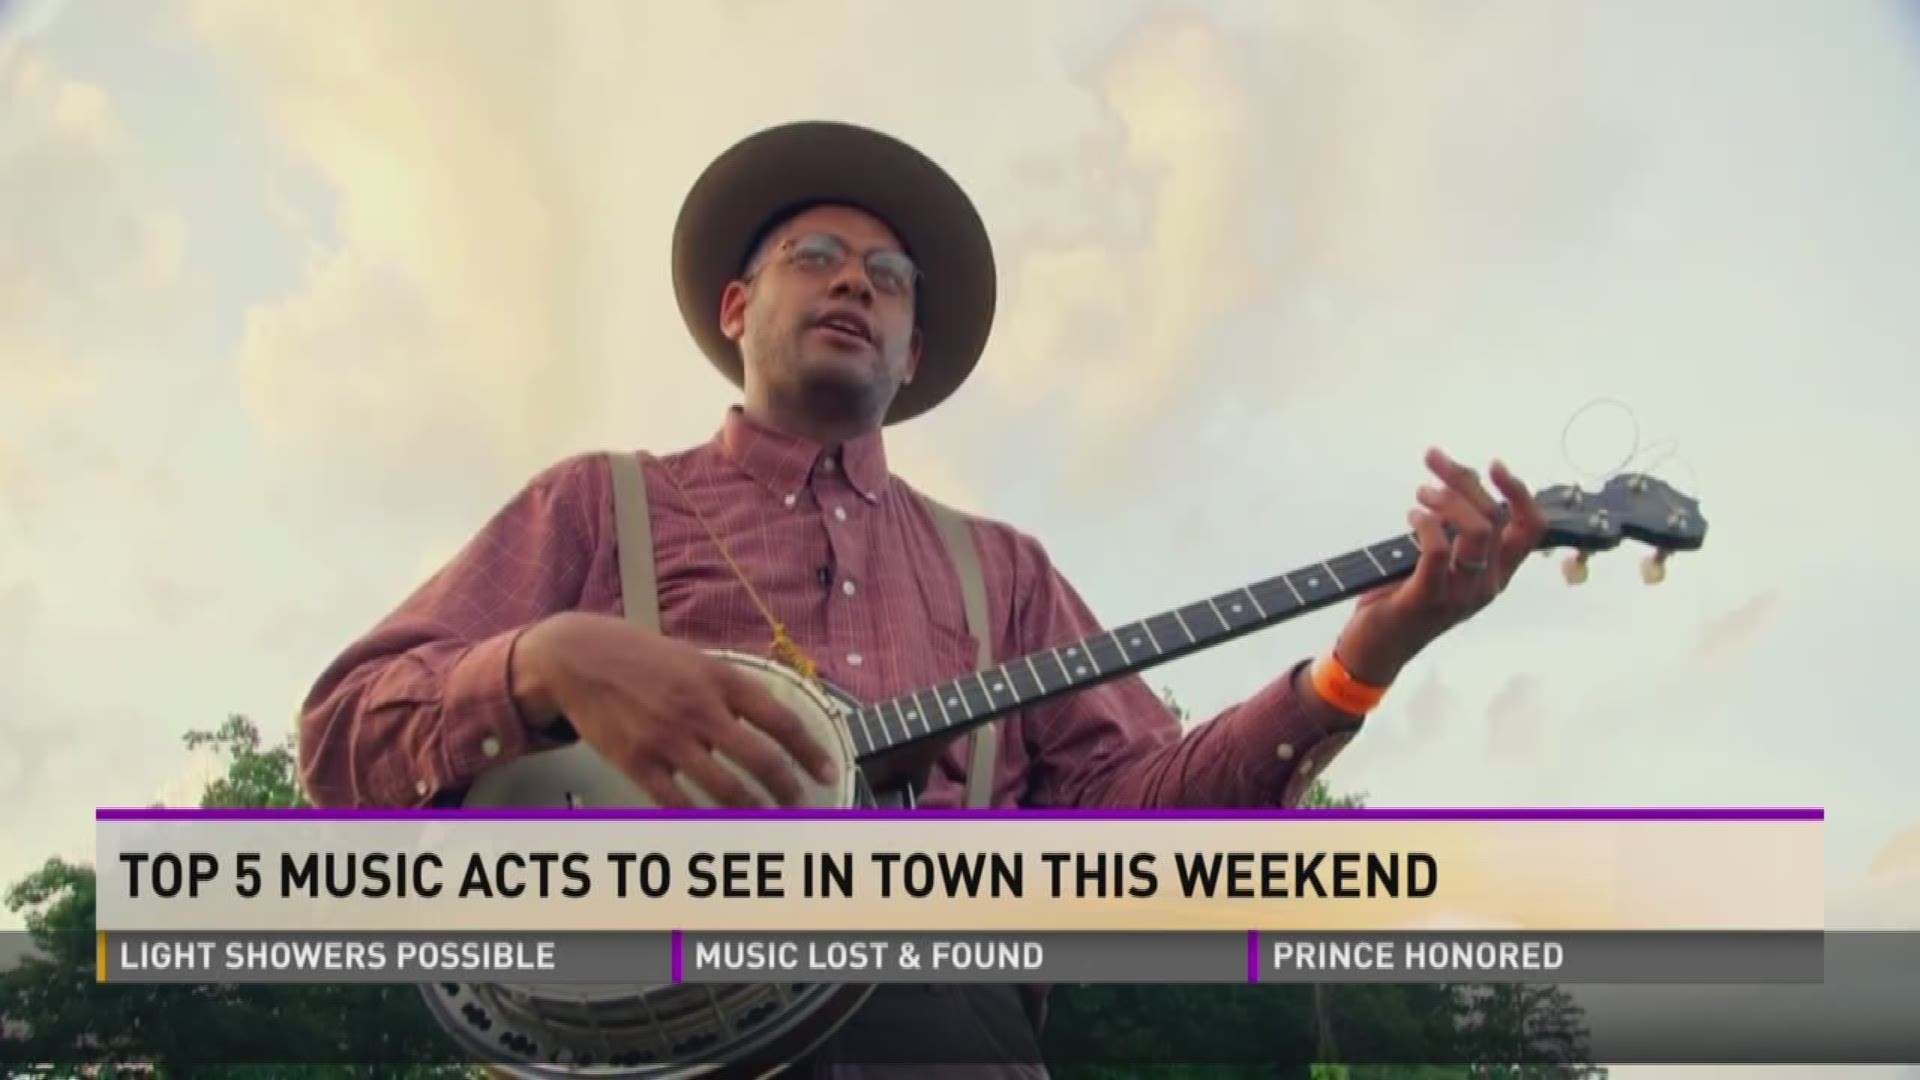 Top 5 Music Acts To See In Town This Weekend